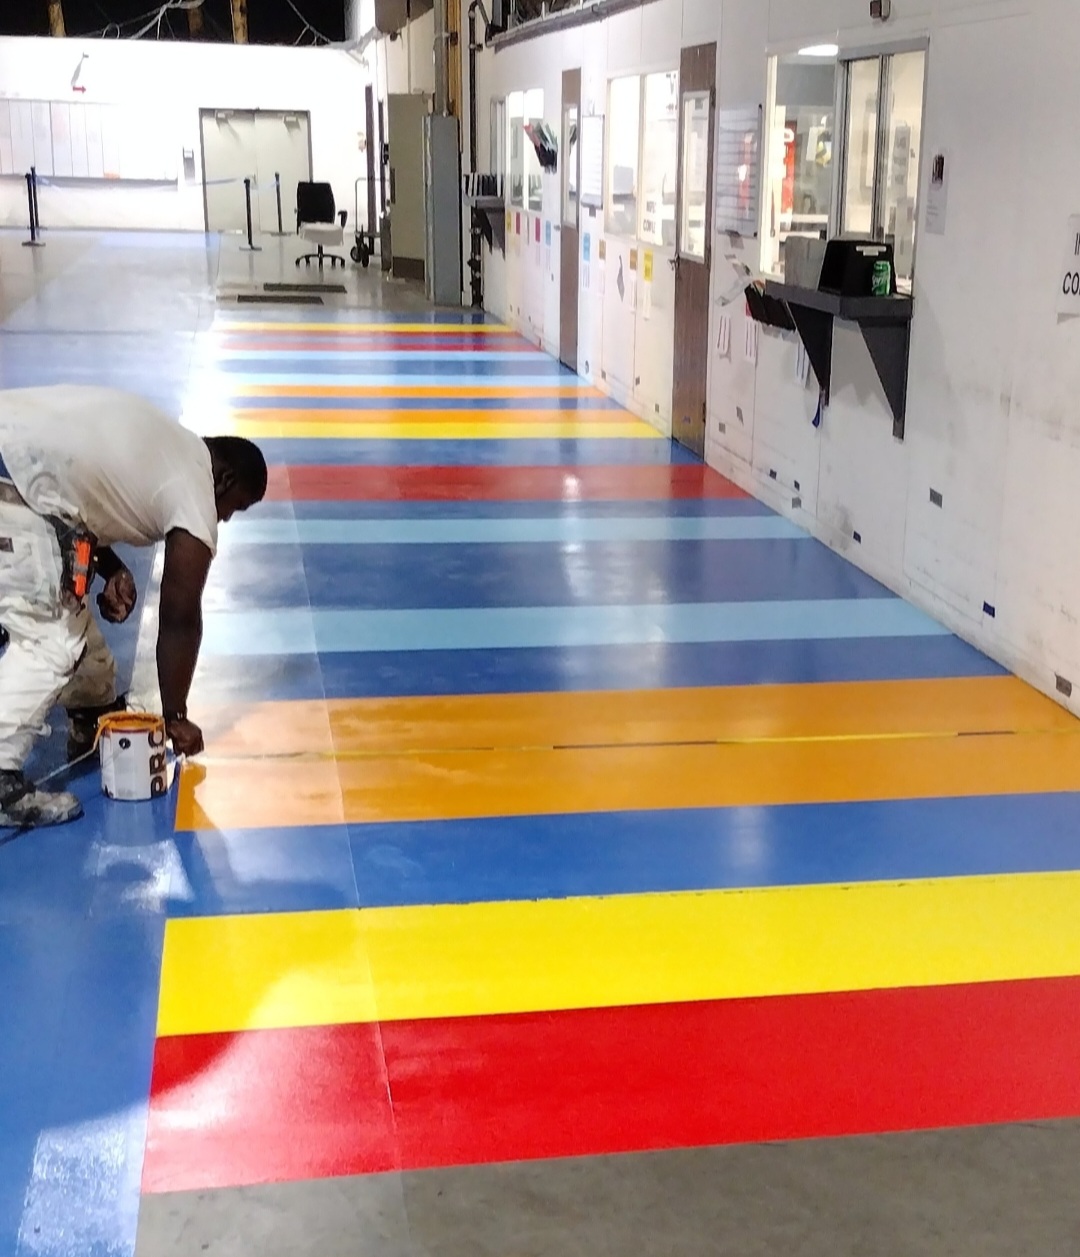 Aesthetic Multi-color Epoxy Floor Staging Area in a Warehouse.